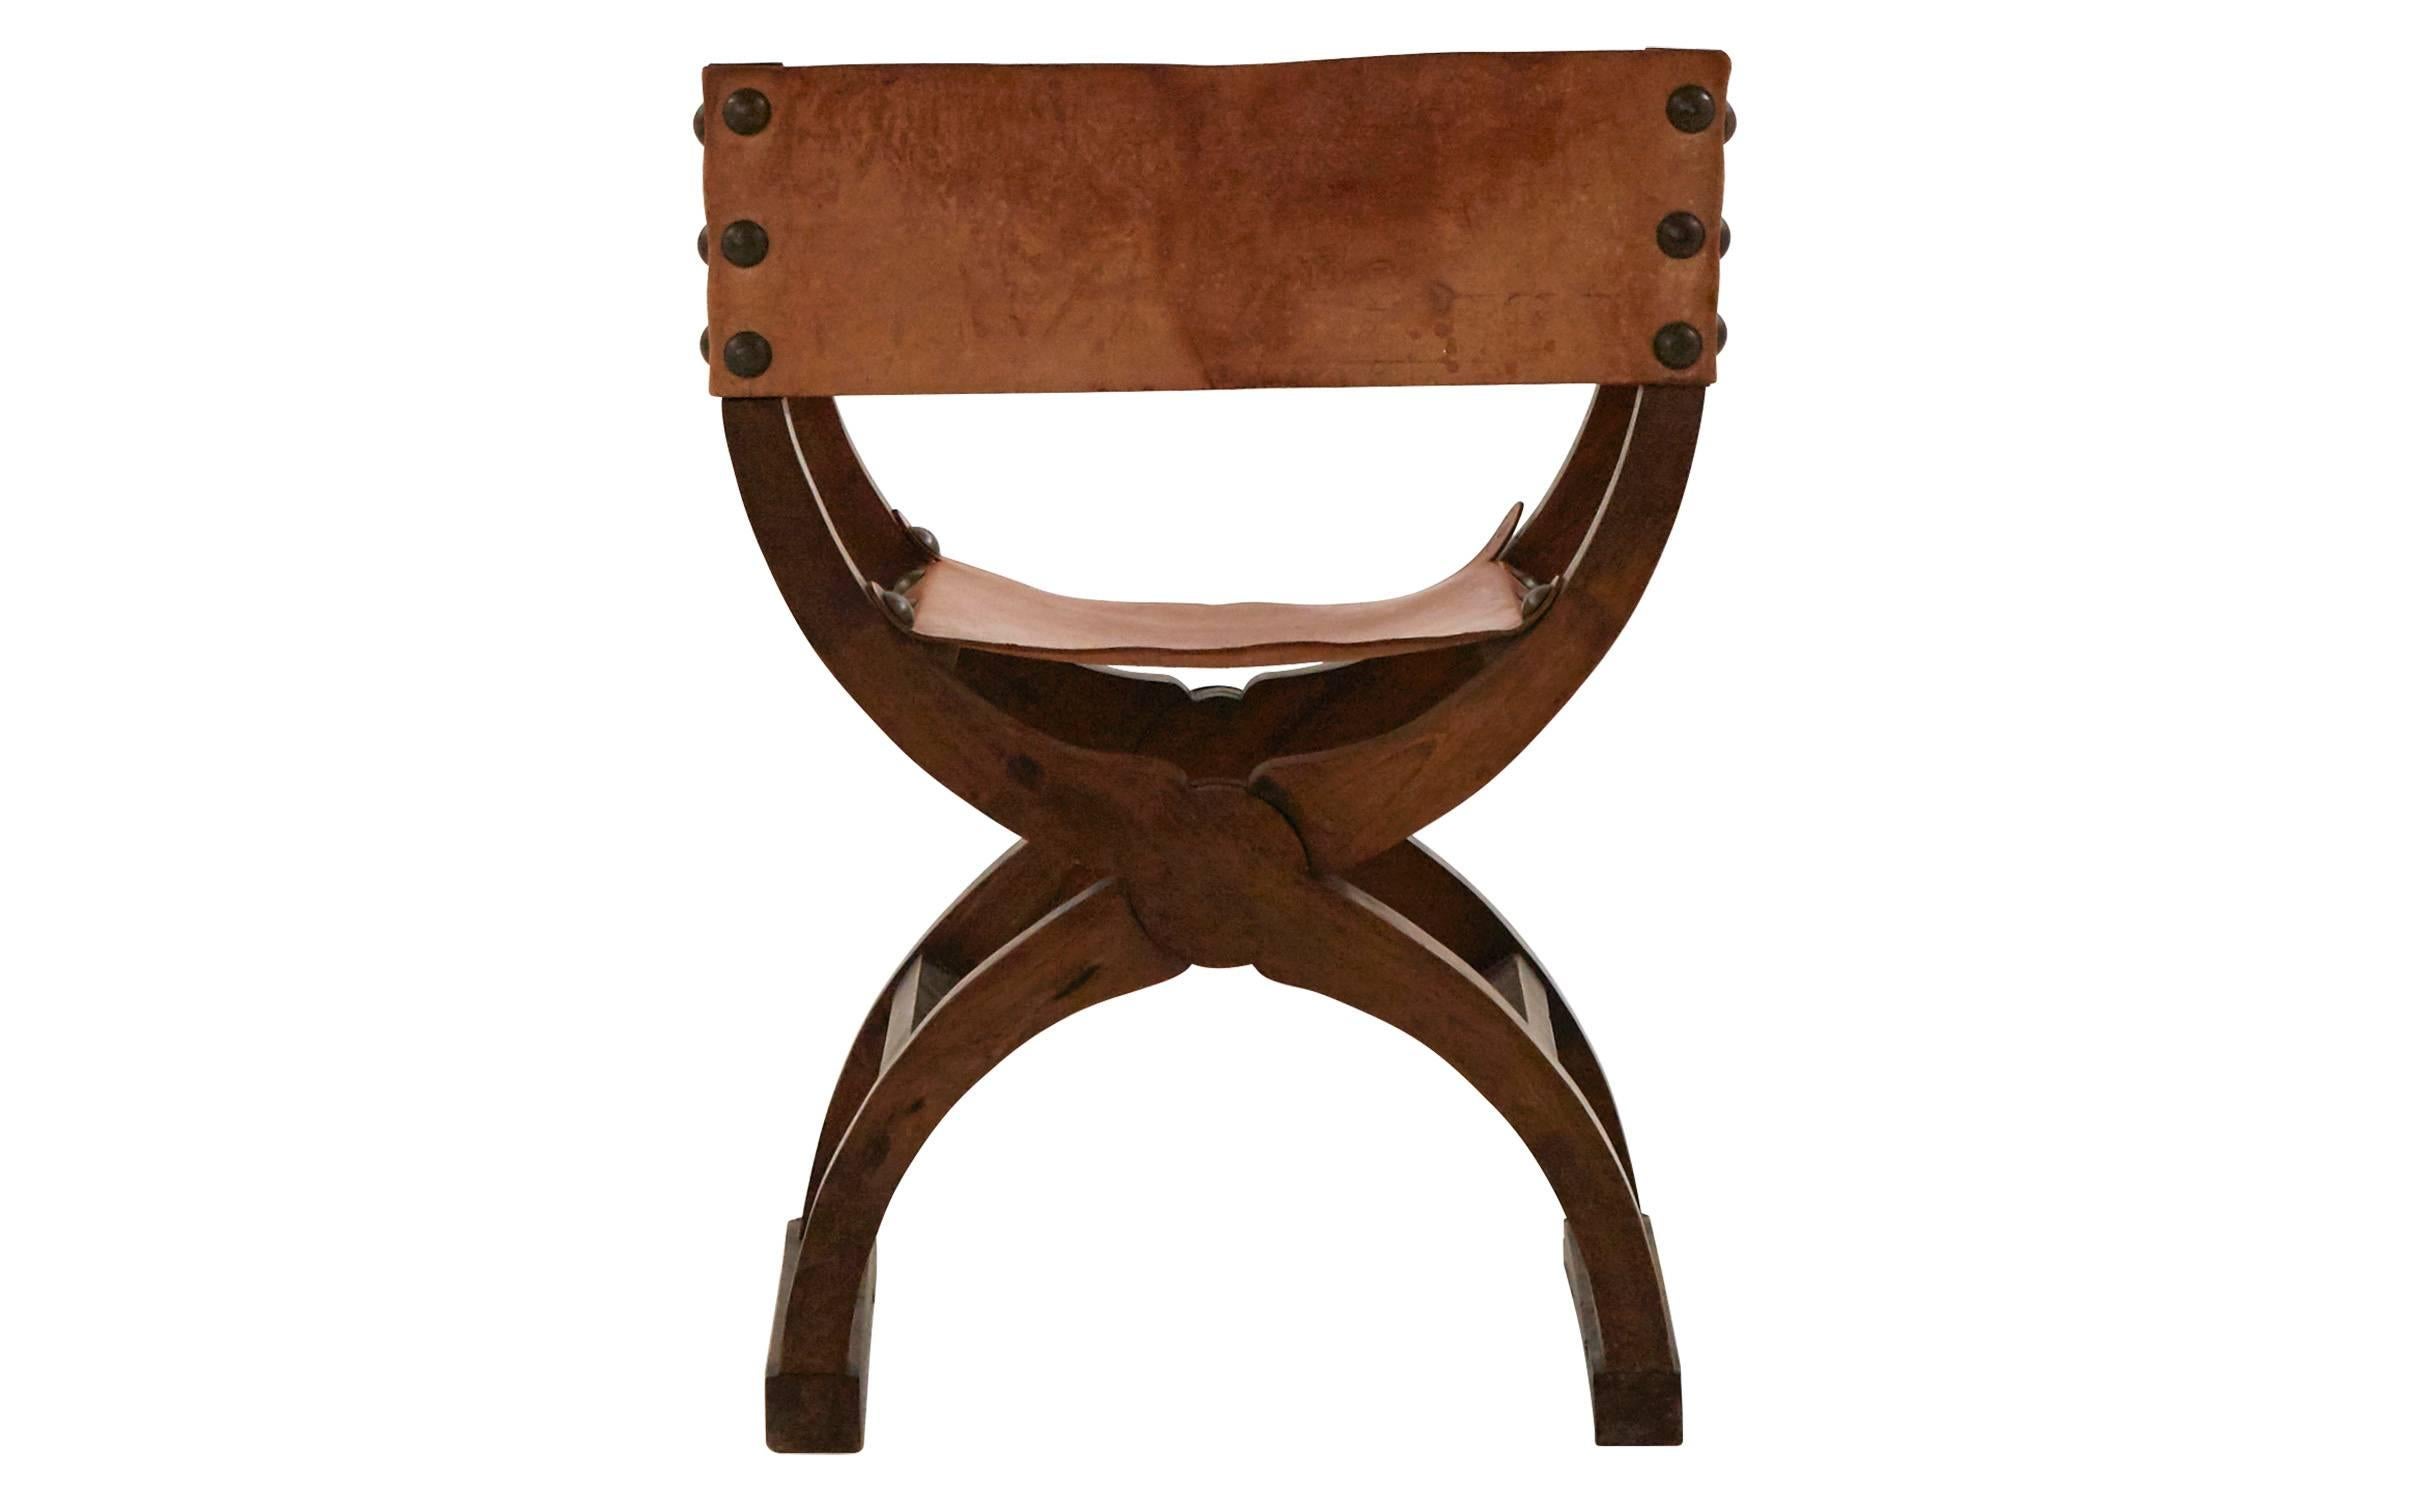 Original leather.
Hand-carved walnut wood.
Folding frame.
Antiqued nailhead,
19th century,
Italian.

Dimensions:
overall: 22.5" W x 17.5" D x 31.5" H. 
Seat height: 17.5" H.
Arm height: 25.5" H.